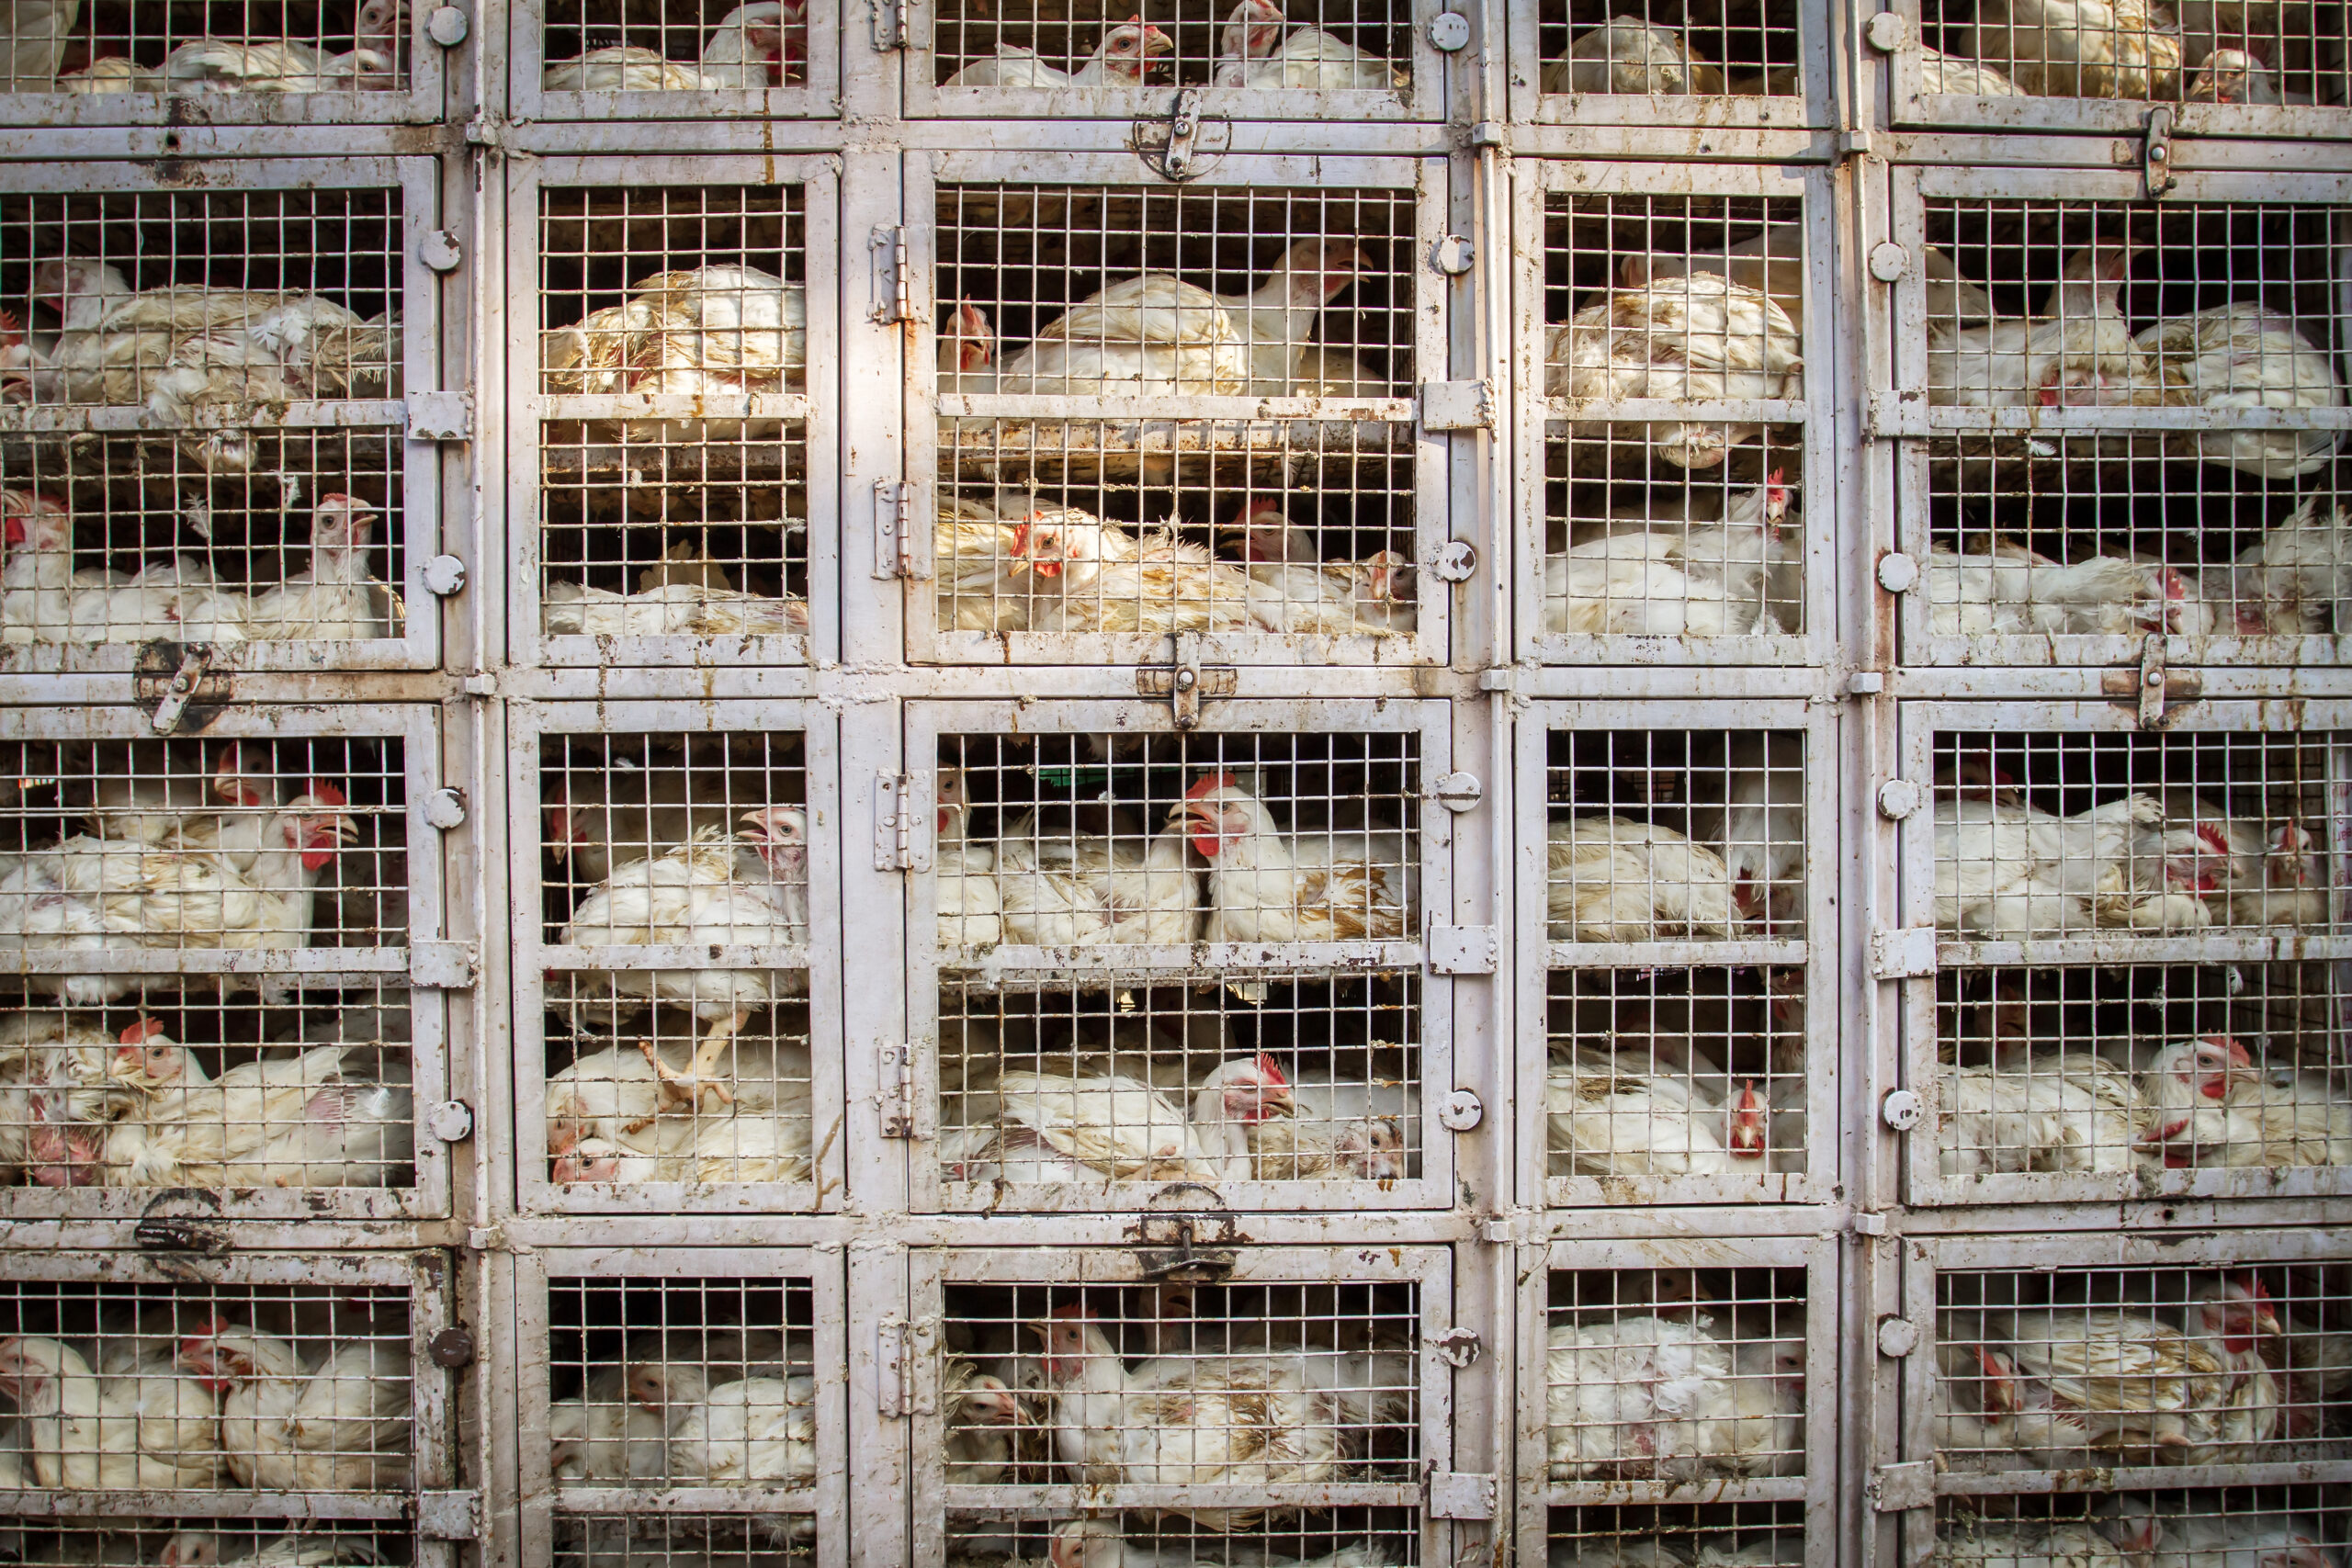 Demand that USDA stop supporting factory farms